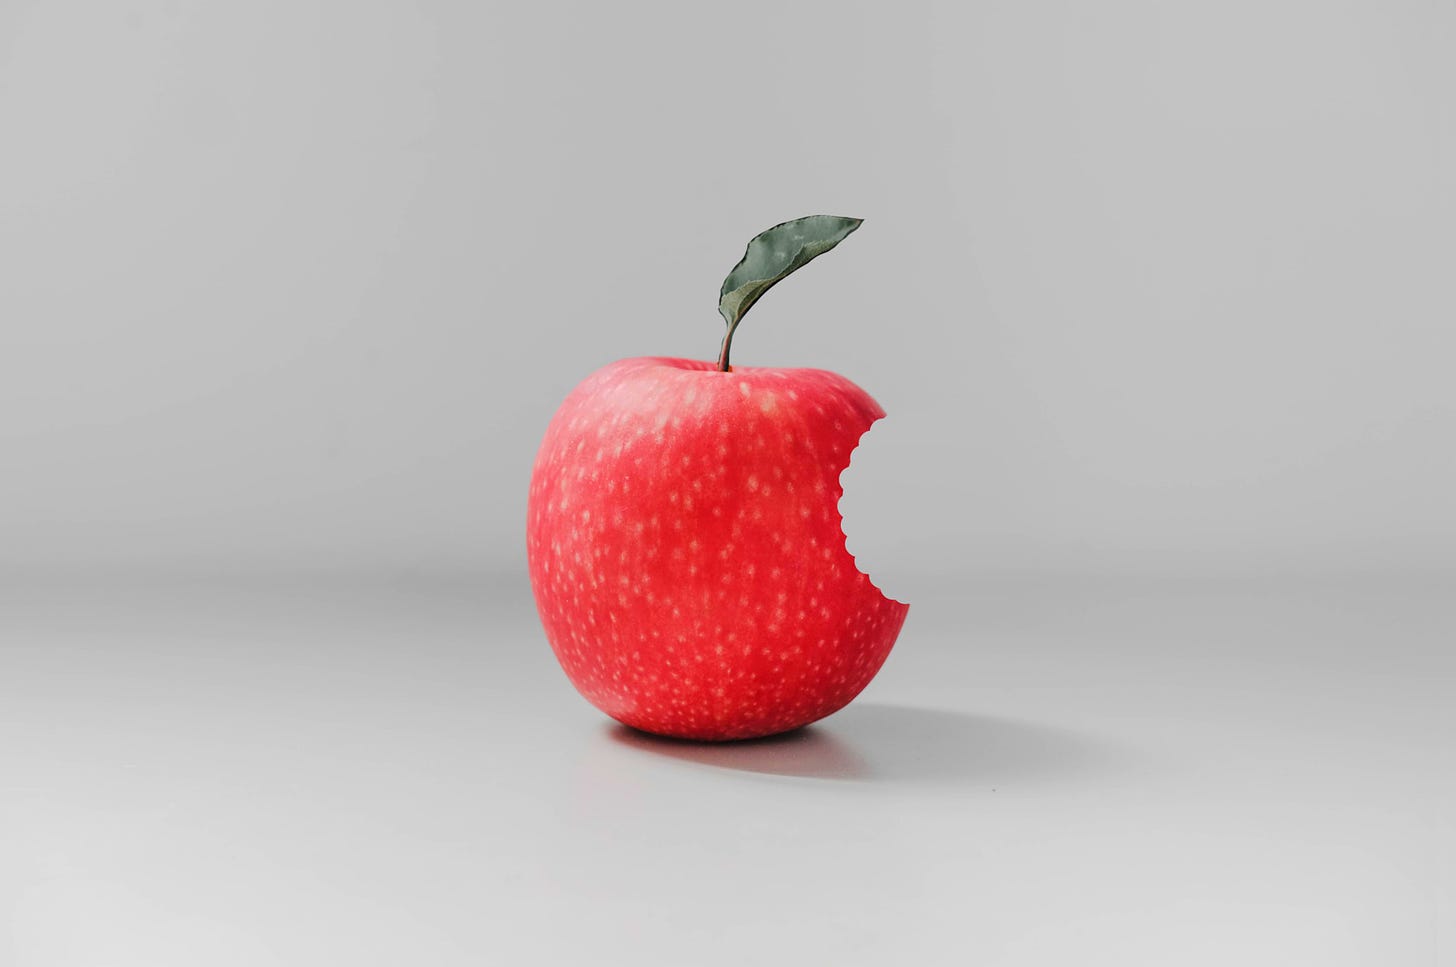 Image of a red apple with a bite stolen from it.